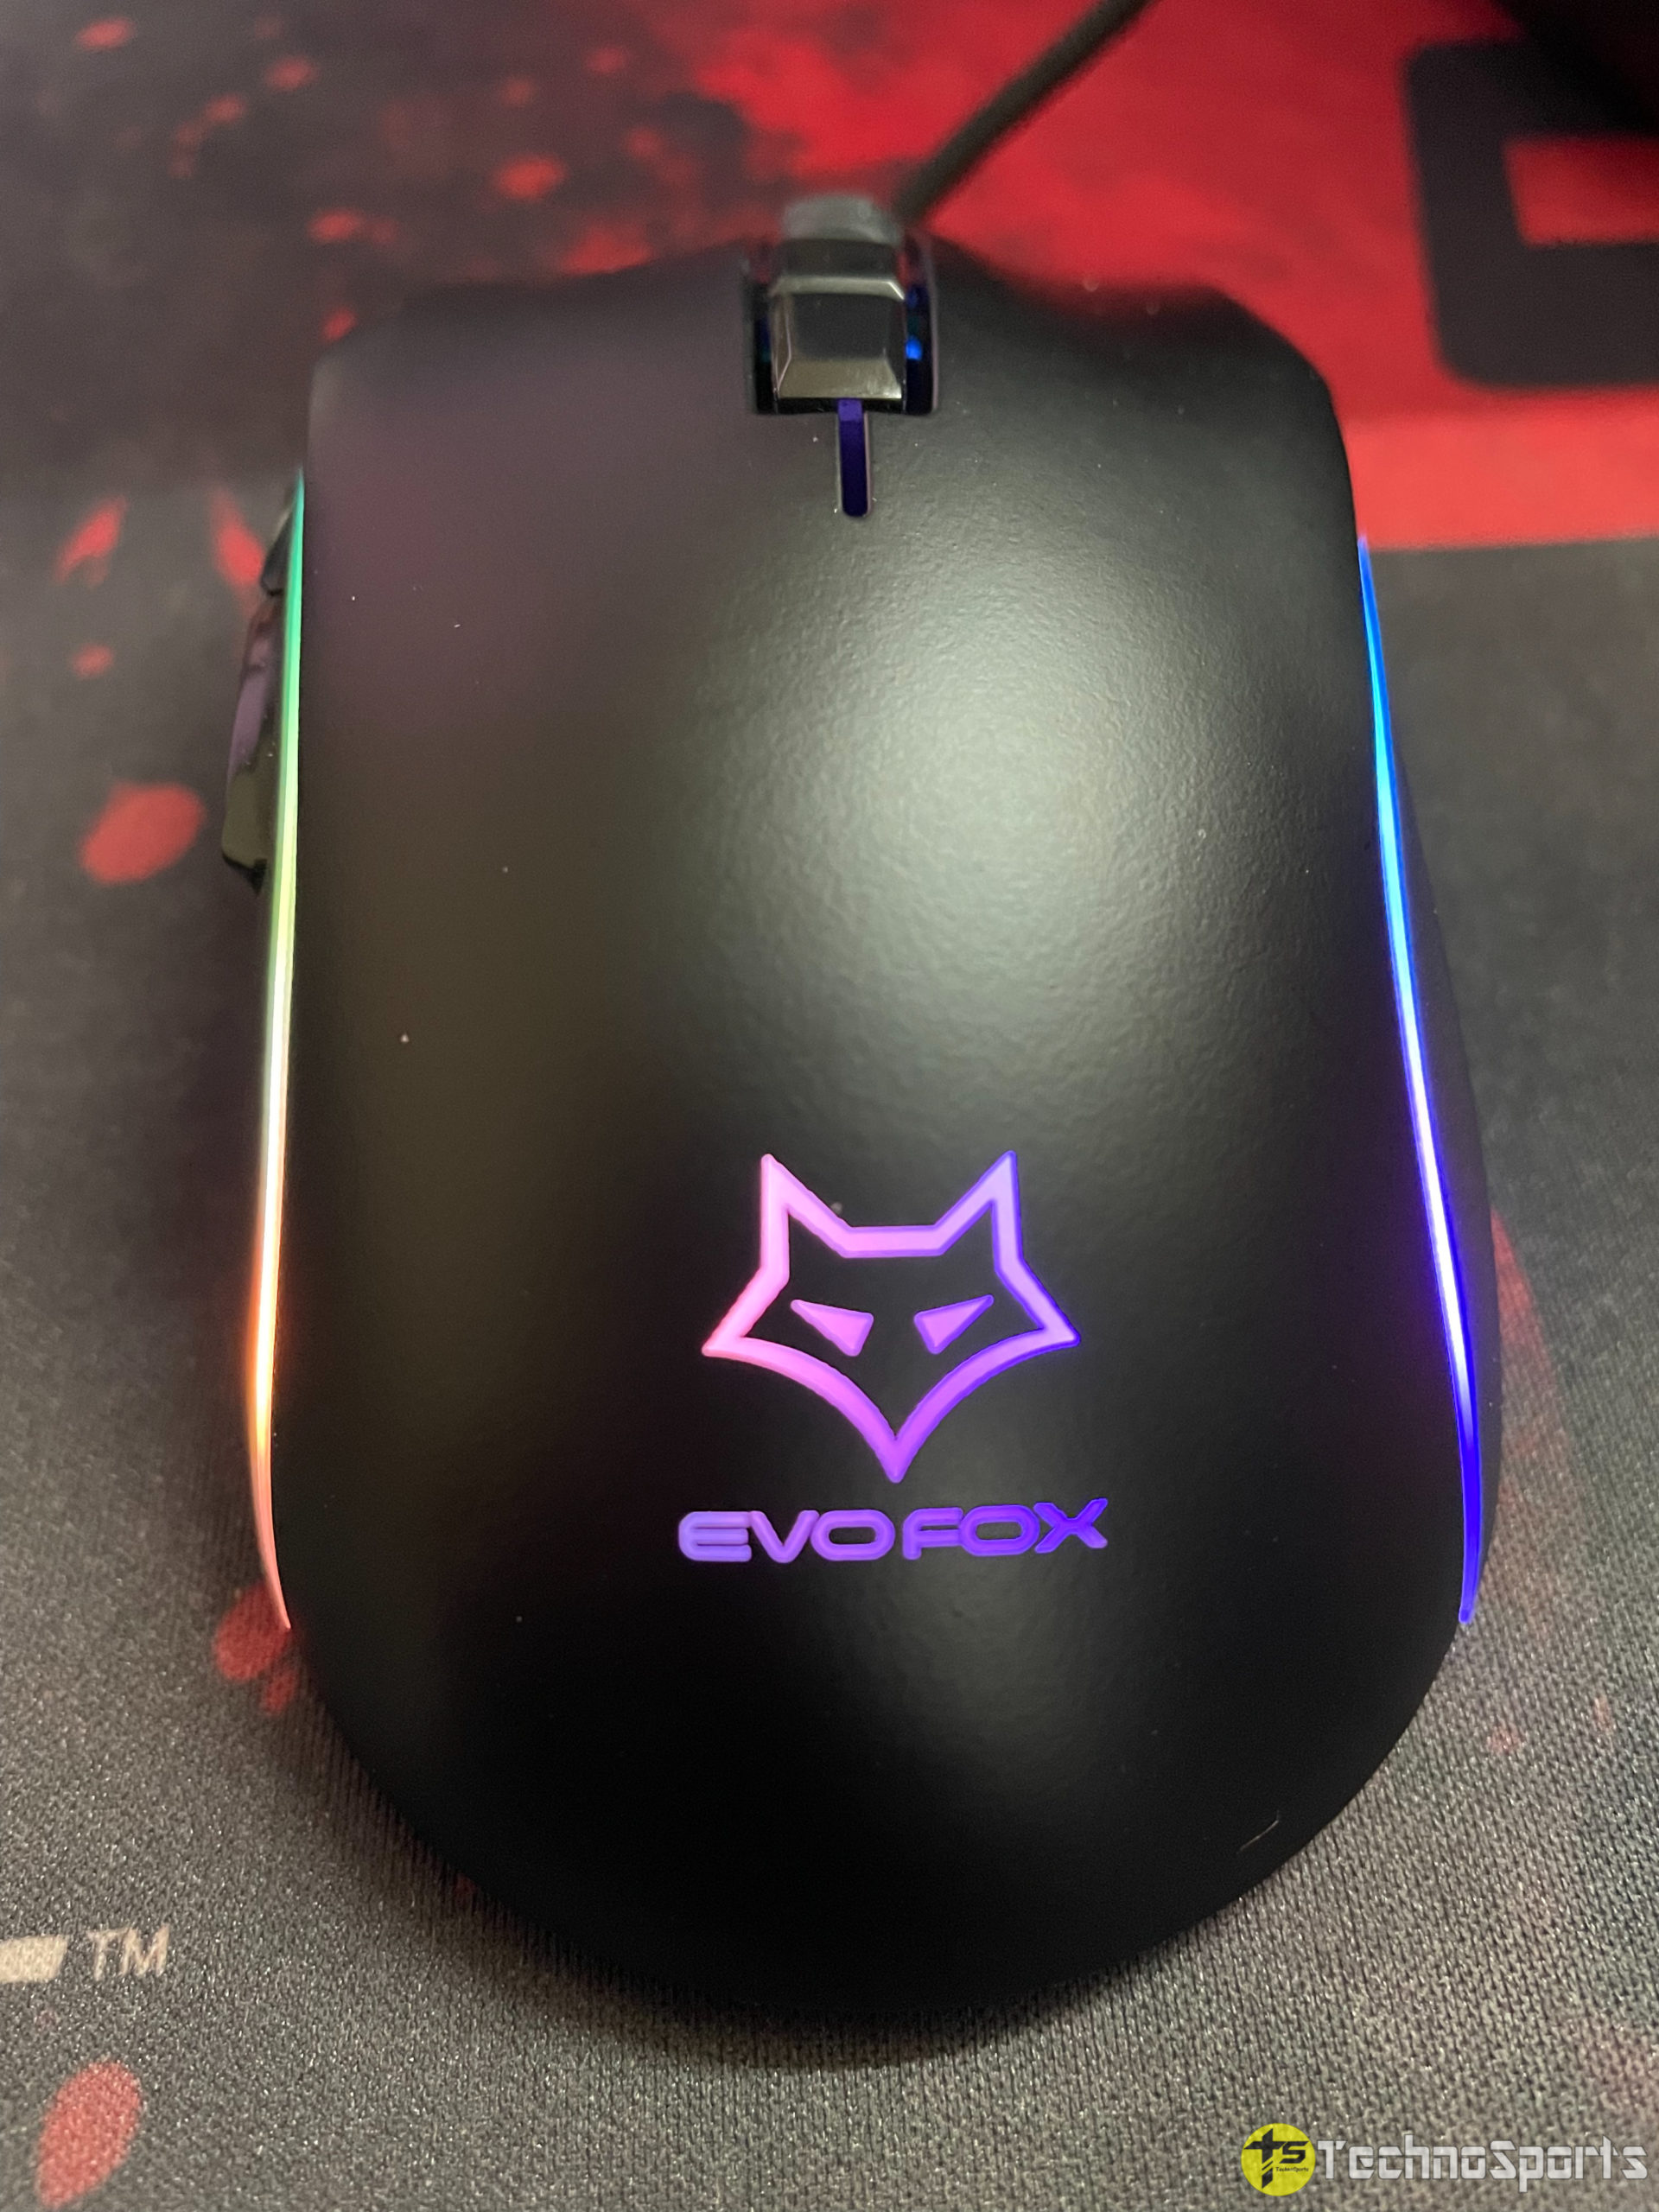 gamingmouse8new scaled Amkette EvoFox Phantom Pro Gaming Mouse review: Absolutely worth it for just Rs 799